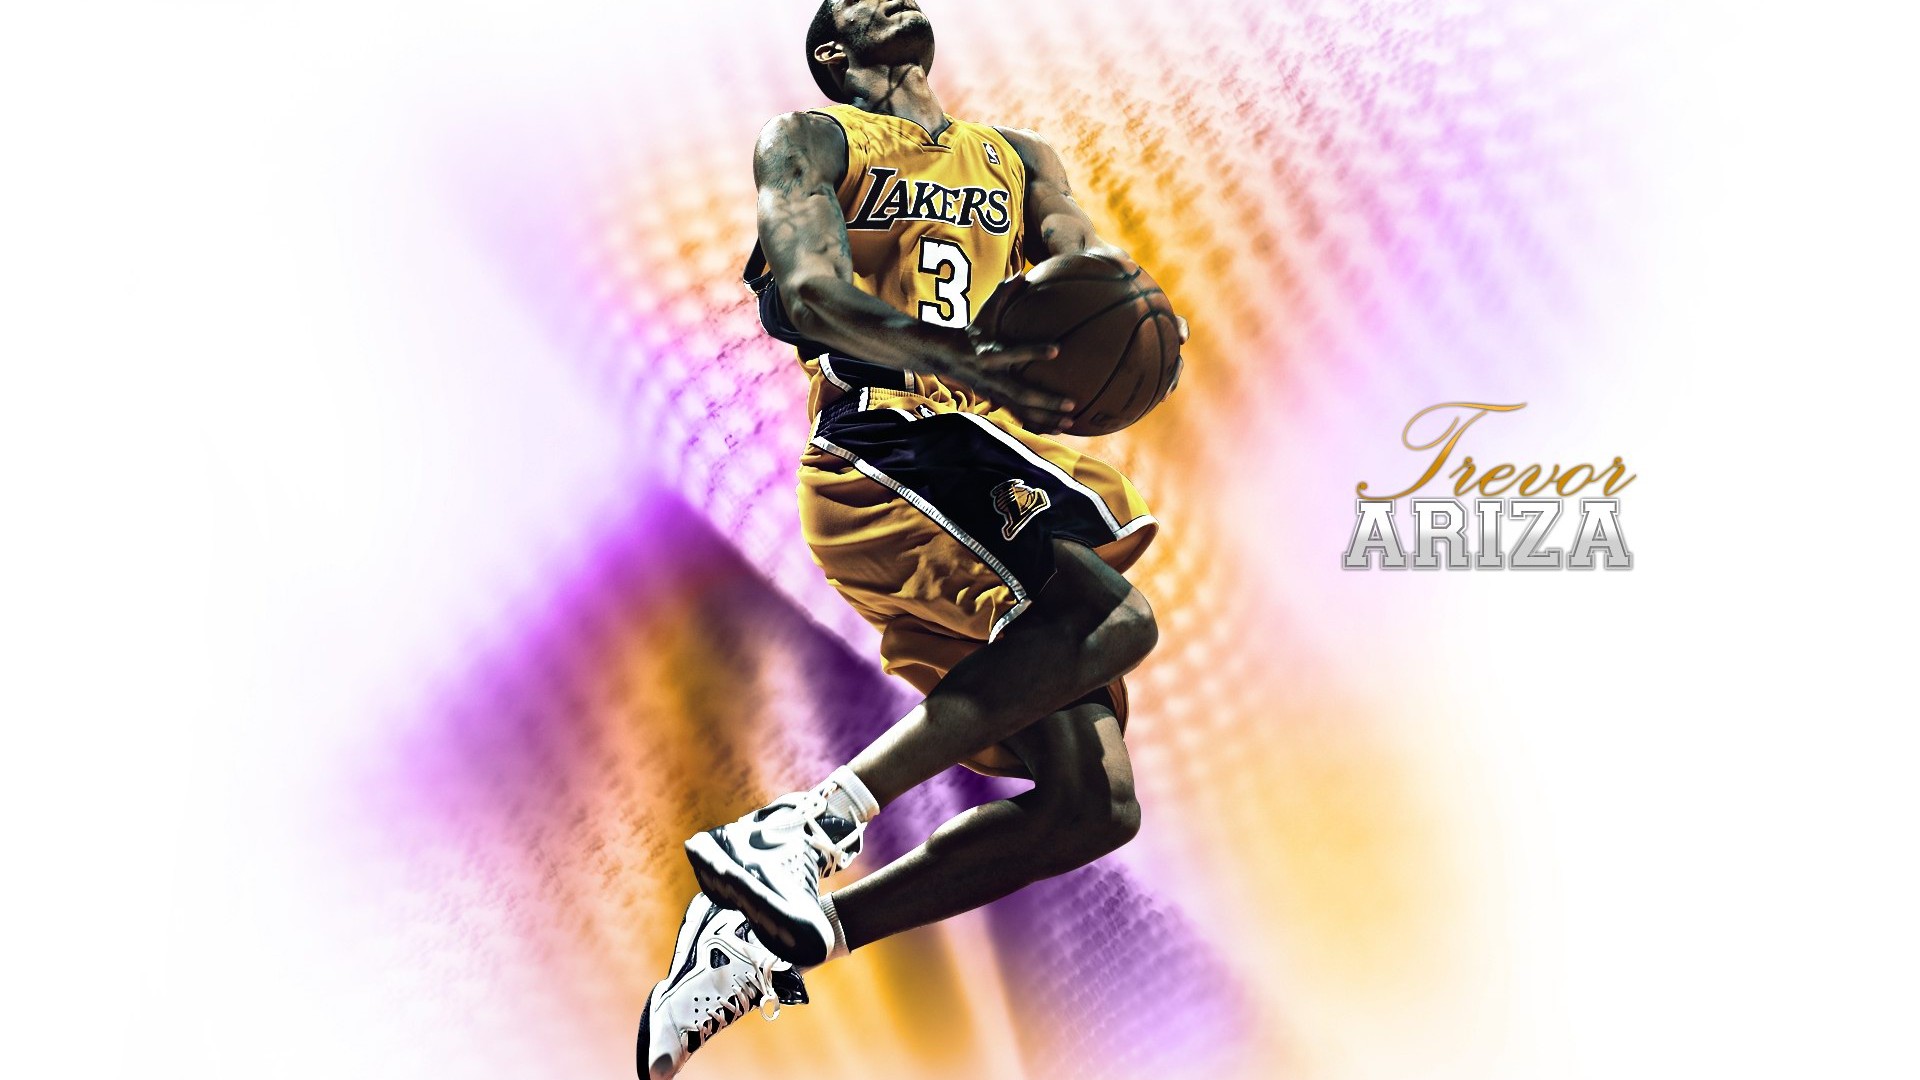 Los Angeles Lakers Wallpaper Oficial #27 - 1920x1080